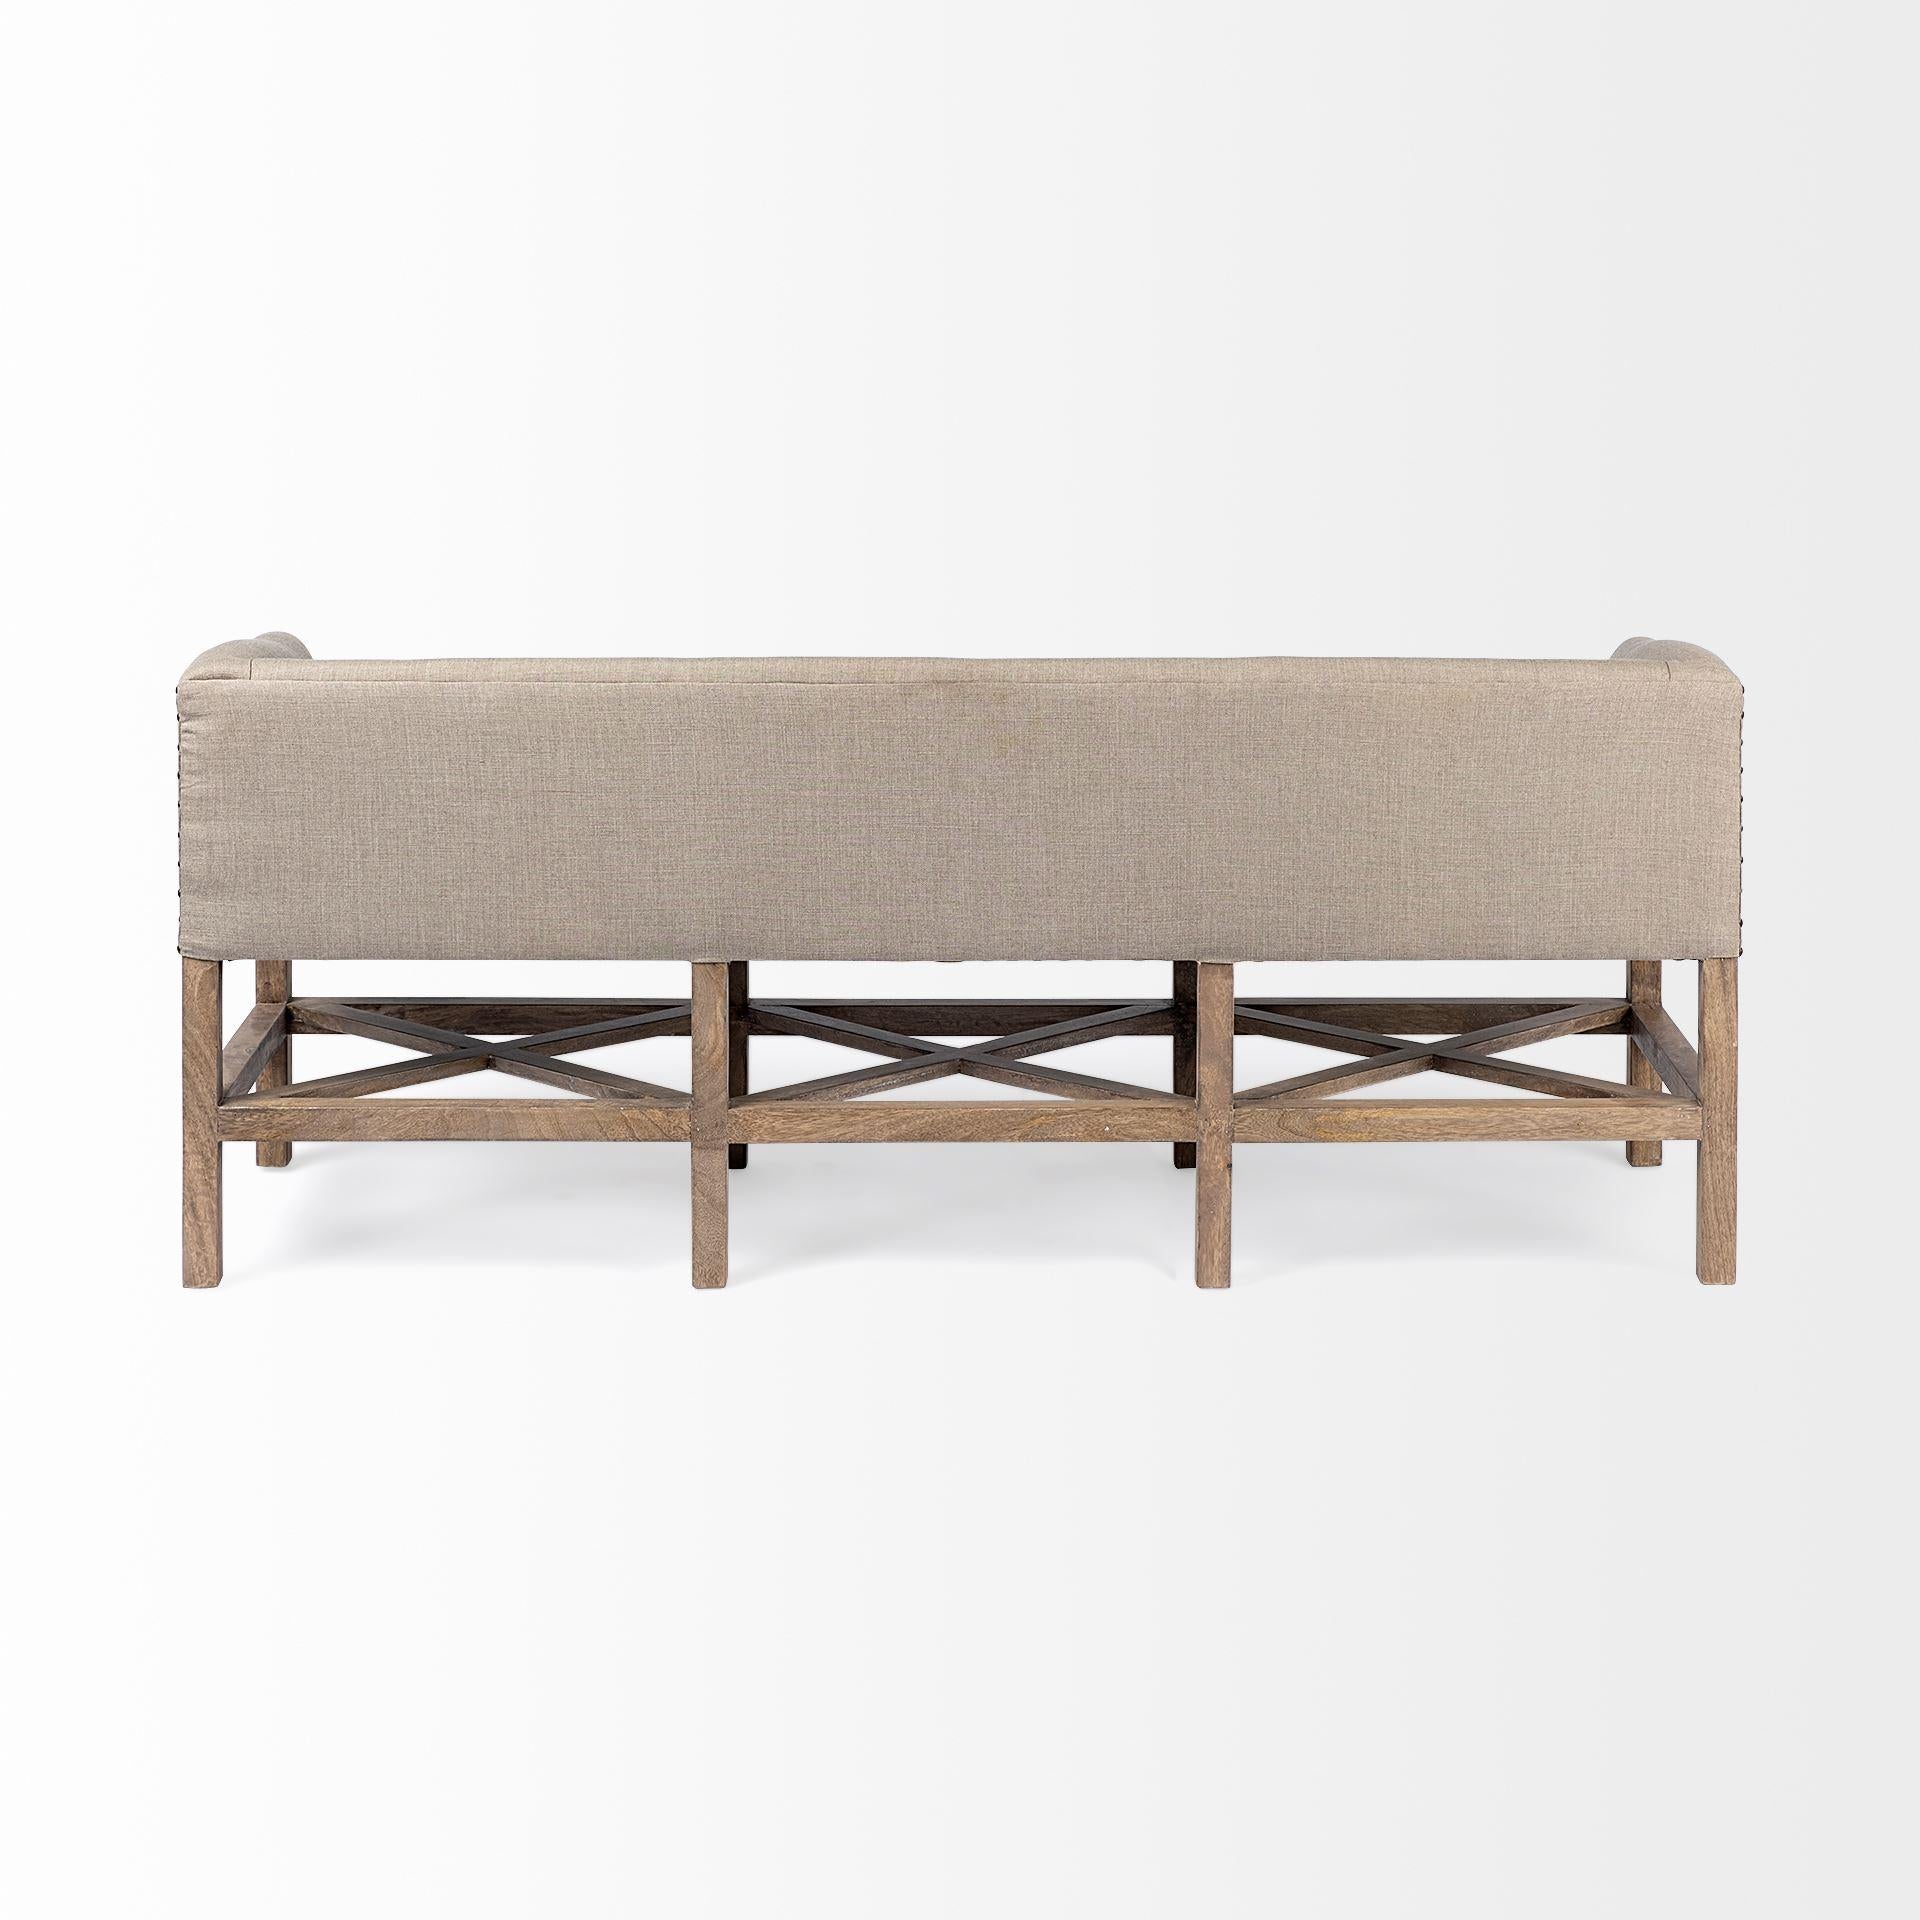 Rectangular Mango WoodLight Brown Finish W Beige Fabric Covered Seat Accent Bench